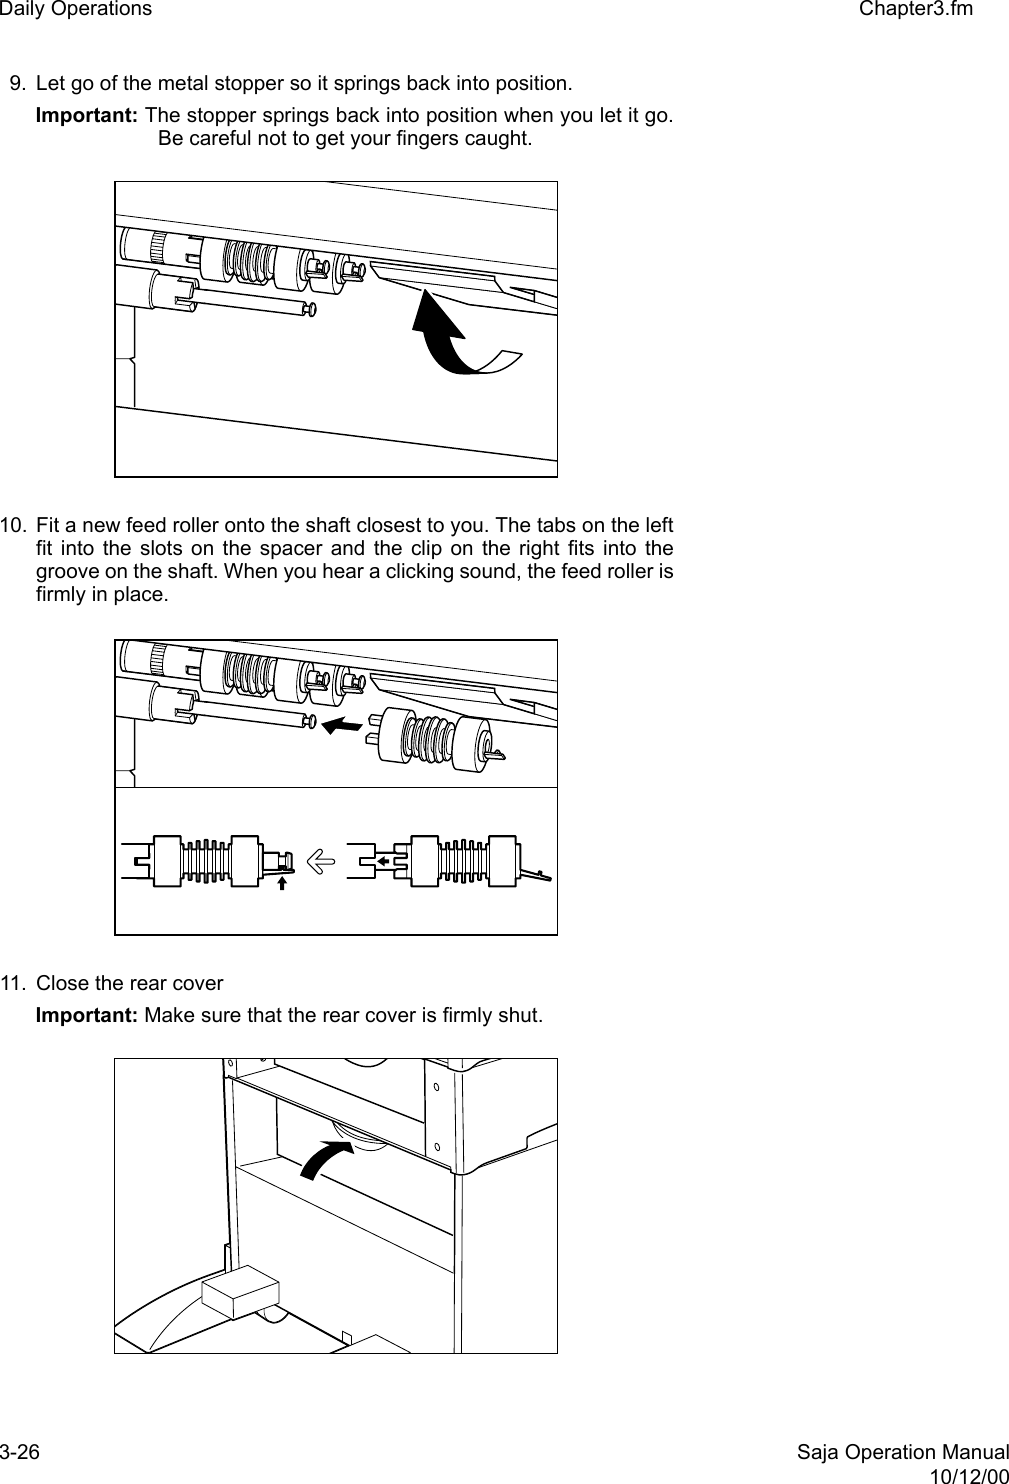 3-26 Saja Operation Manual10/12/00Daily Operations Chapter3.fm9. Let go of the metal stopper so it springs back into position. Important: The stopper springs back into position when you let it go.Be careful not to get your fingers caught.10. Fit a new feed roller onto the shaft closest to you. The tabs on the leftfit into the slots on the spacer and the clip on the right fits into thegroove on the shaft. When you hear a clicking sound, the feed roller isfirmly in place. 11. Close the rear coverImportant: Make sure that the rear cover is firmly shut.